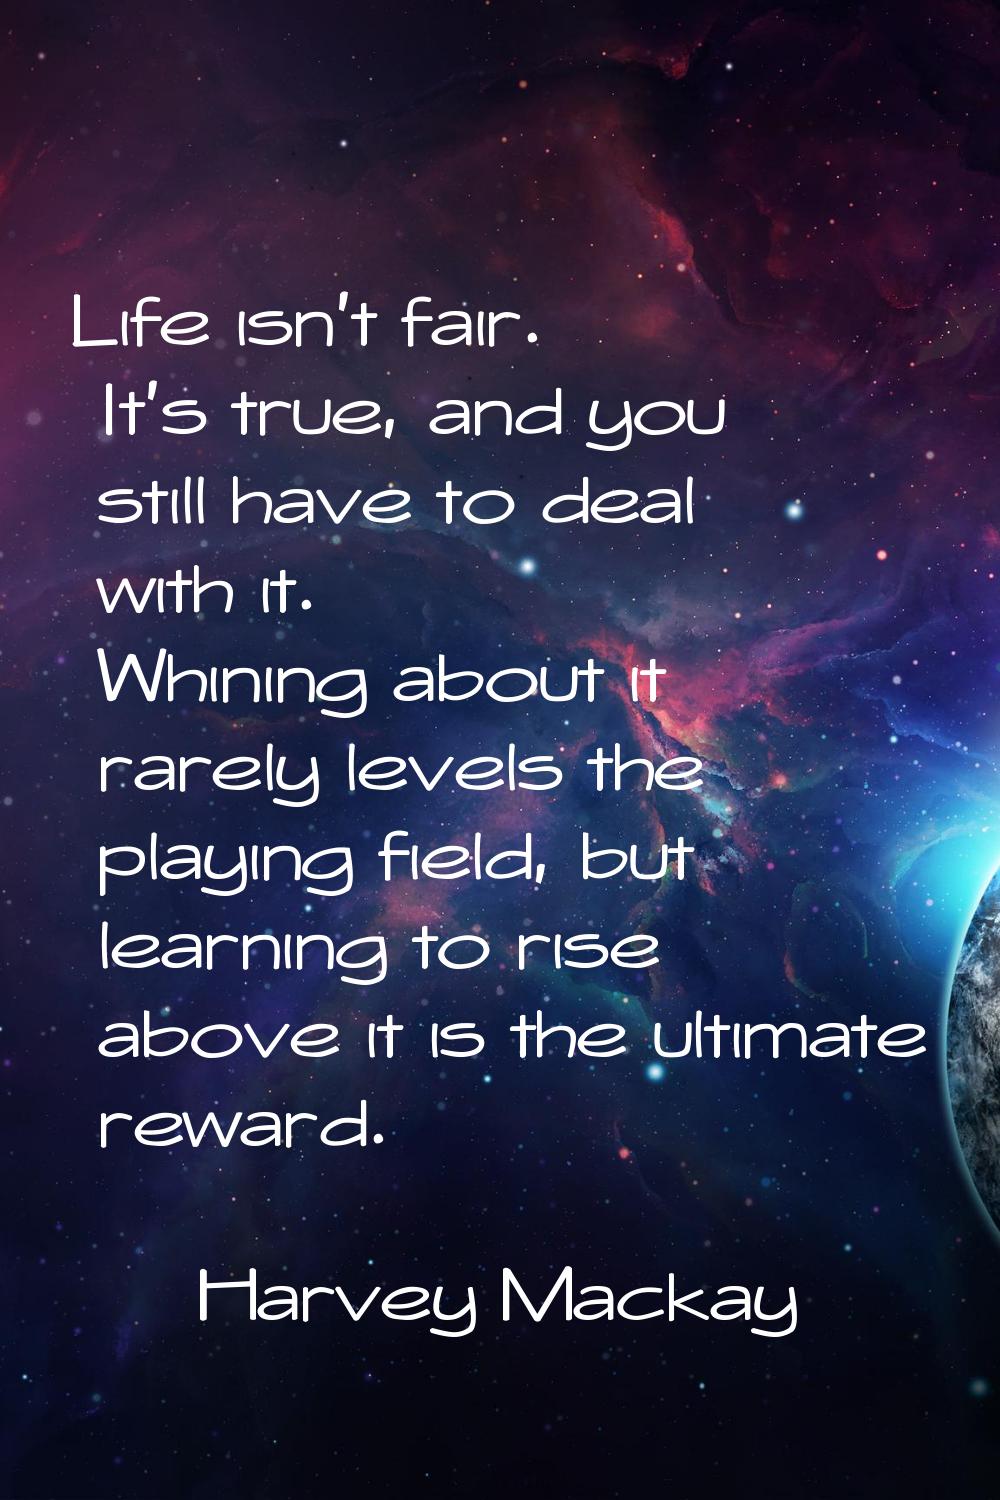 Life isn't fair. It's true, and you still have to deal with it. Whining about it rarely levels the 